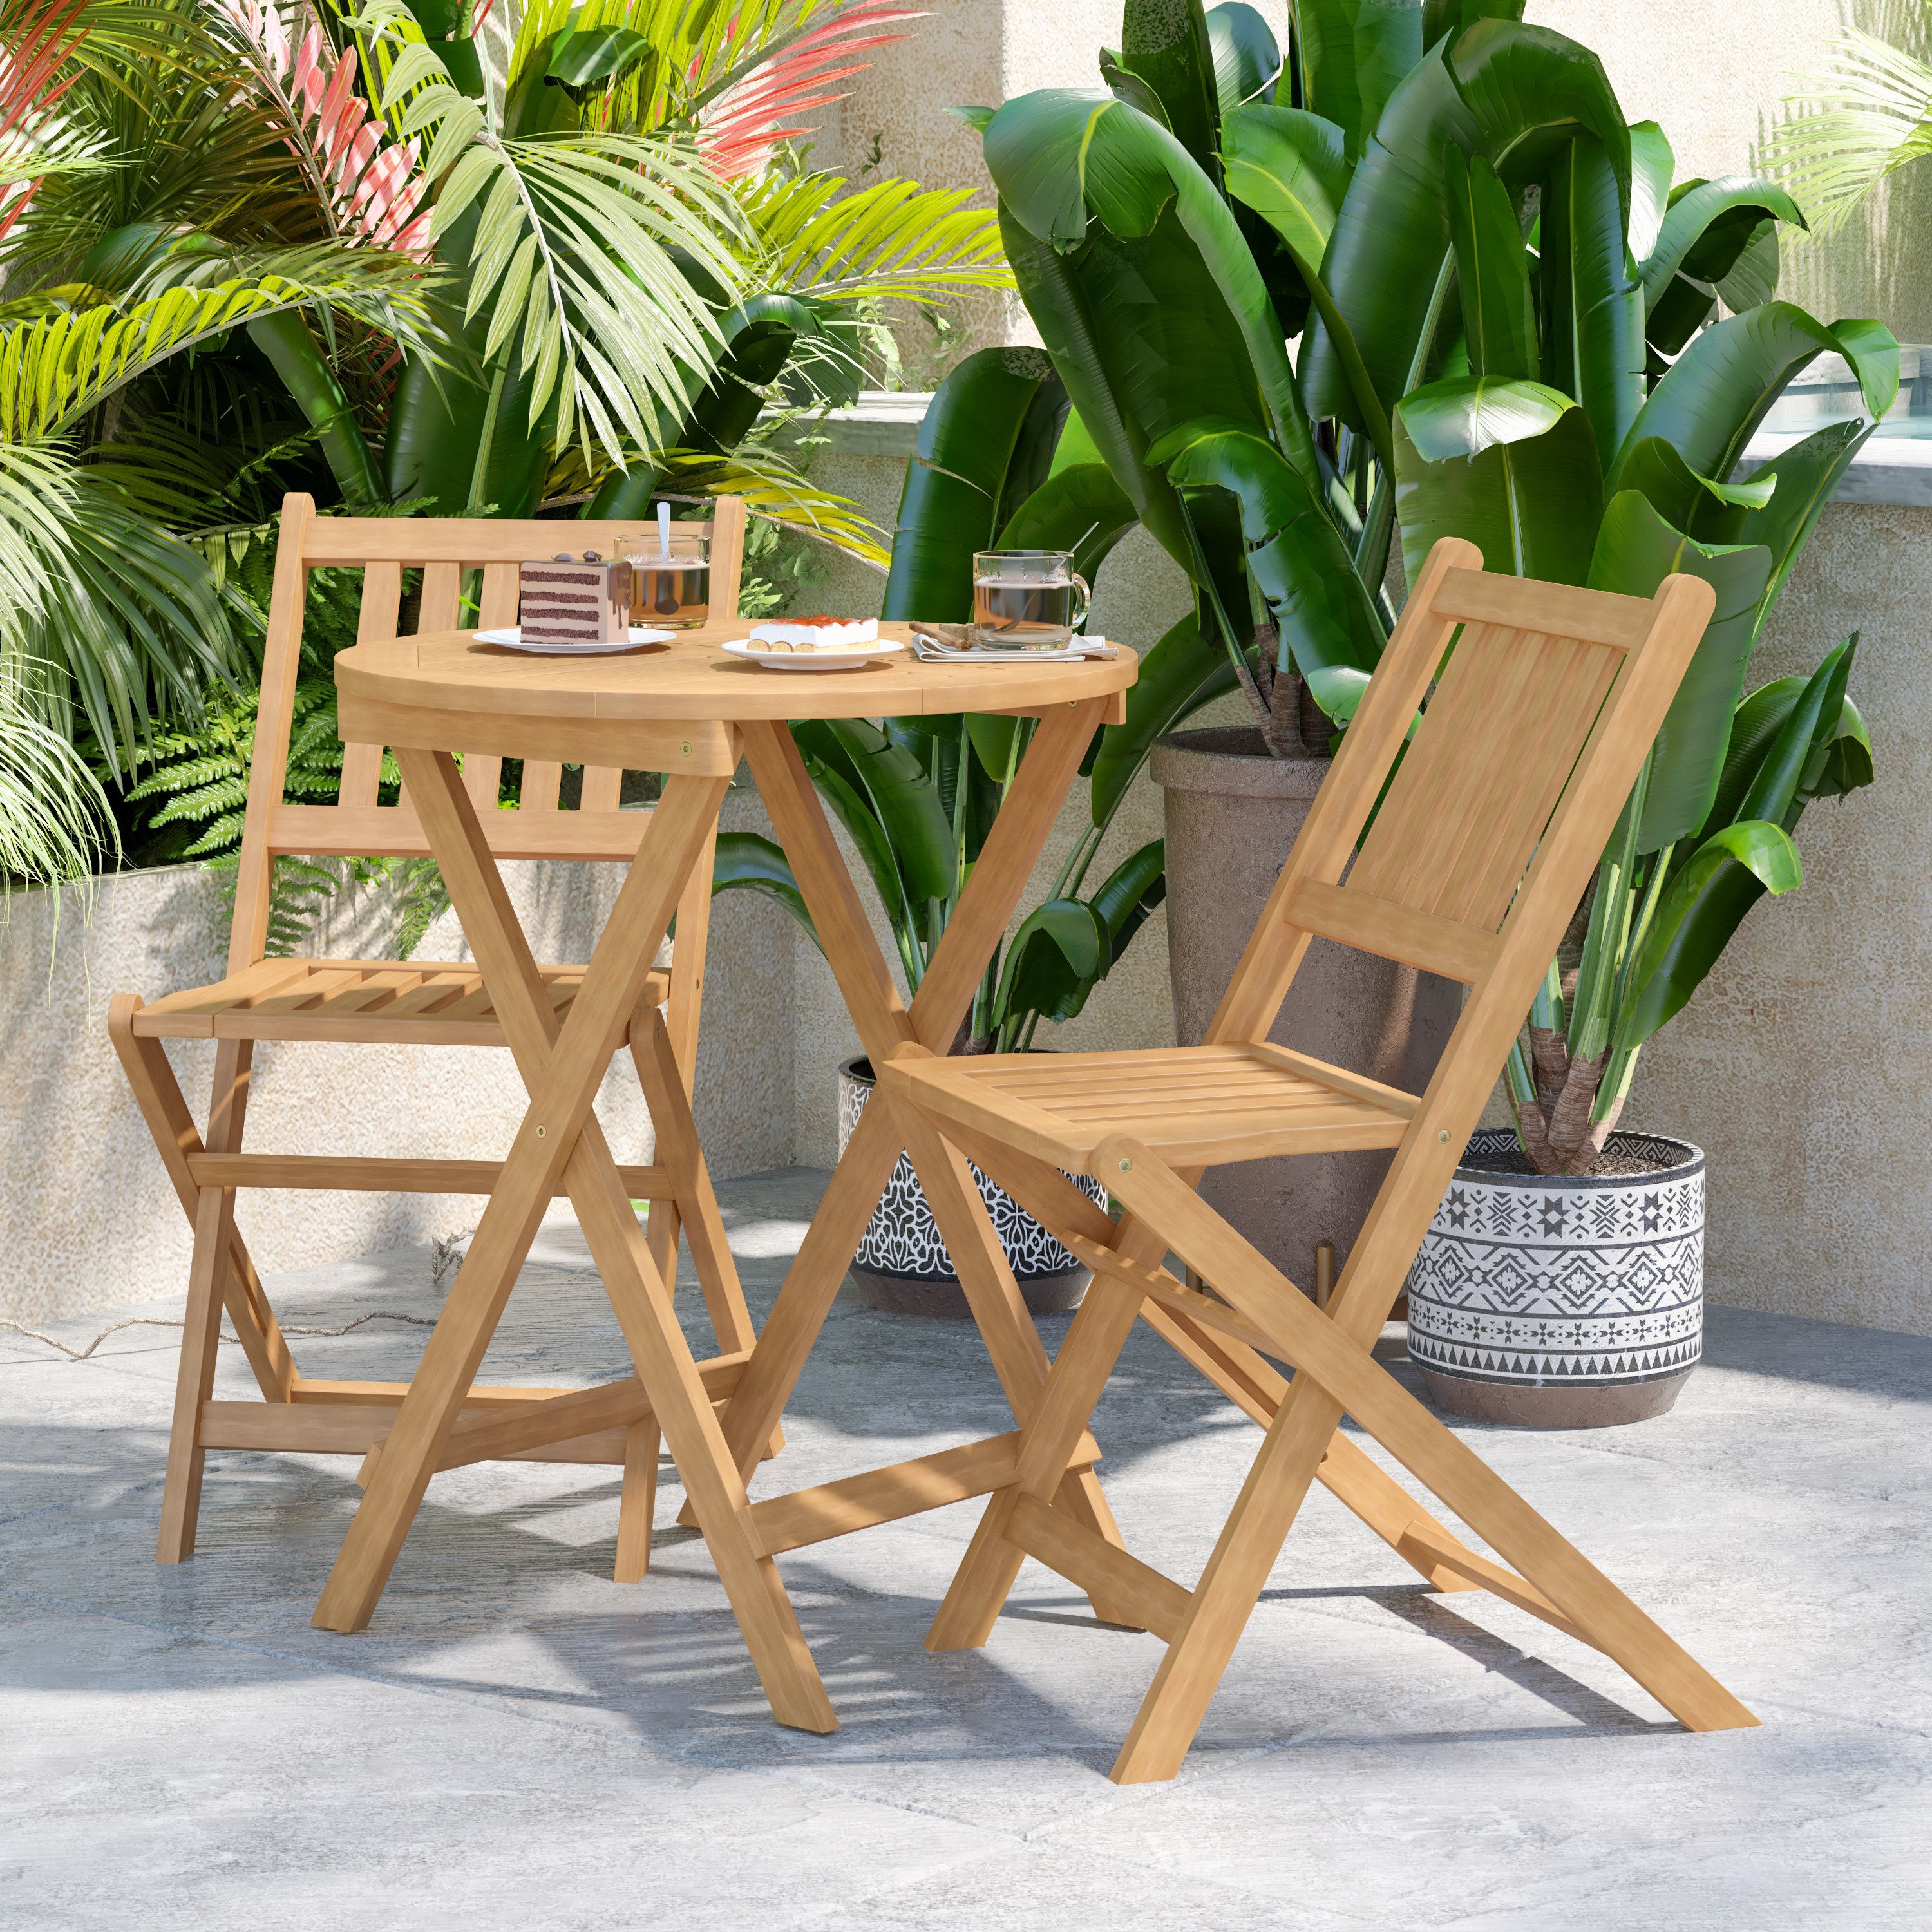 Most Popular Acacia Wood With Table Garden Wooden Furniture With Winston Porter Edil Indoor/outdoor Acacia Wood Folding Table And 2 Chair  Bistro Set & Reviews (View 6 of 15)